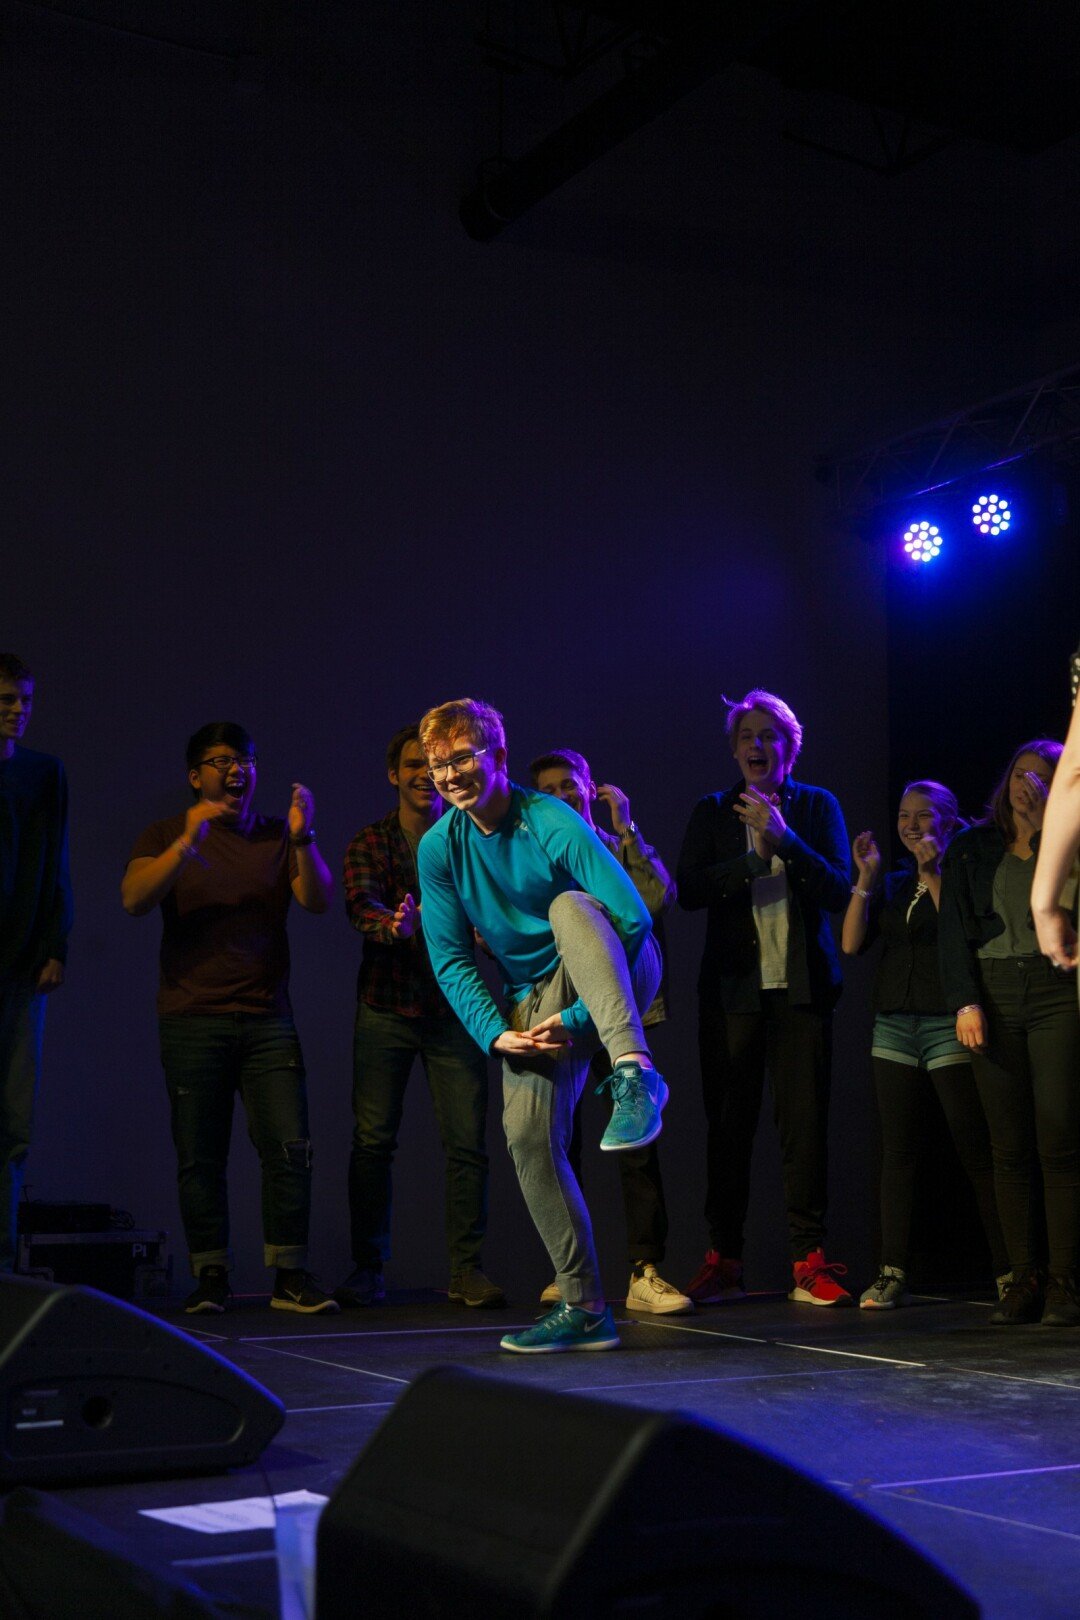 HOP TO IT. The 7th Annual Eau Claire Improv Festival (Jan. 18 at The Metro) featured Chicago’s Second City group performing “Immediate Musical”  (a whole musical based on one audience suggestion), along with Memorial High School Improv, Shambles, and Minneapolis-based Glassworks Improv.